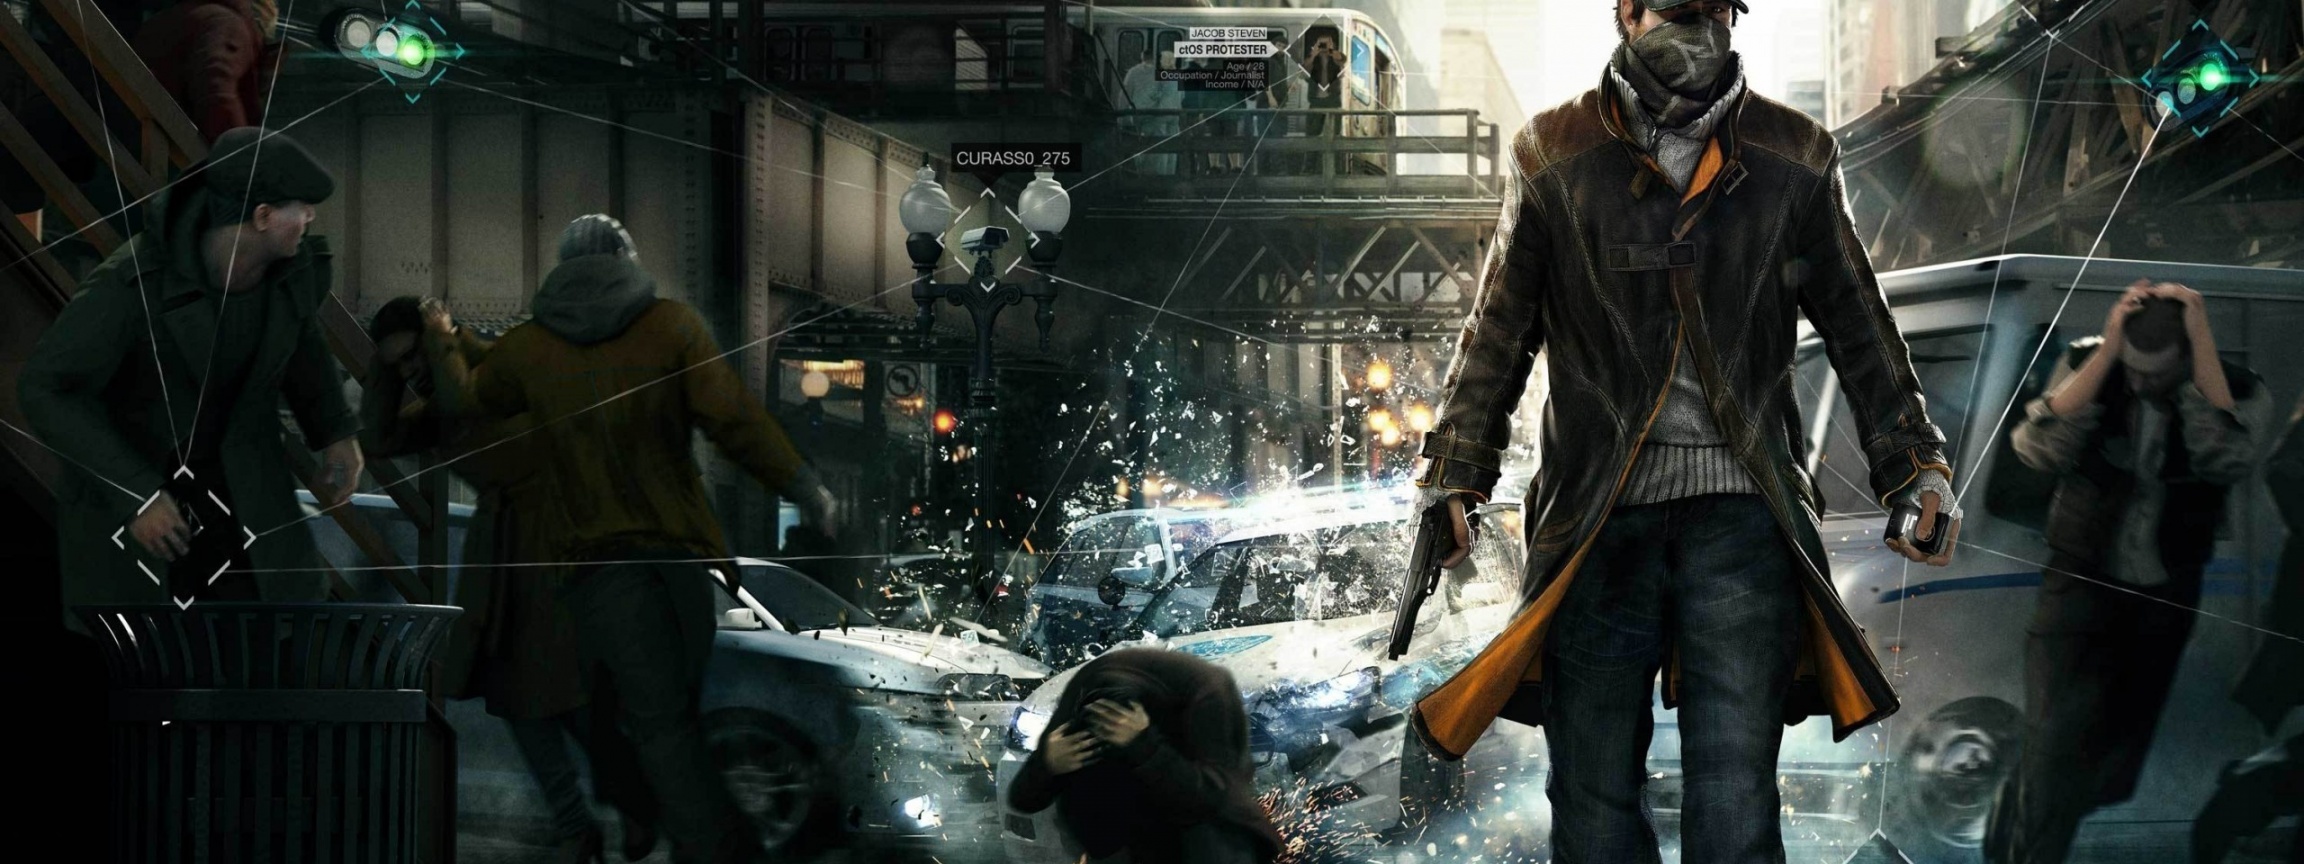 Watch Dogs Game